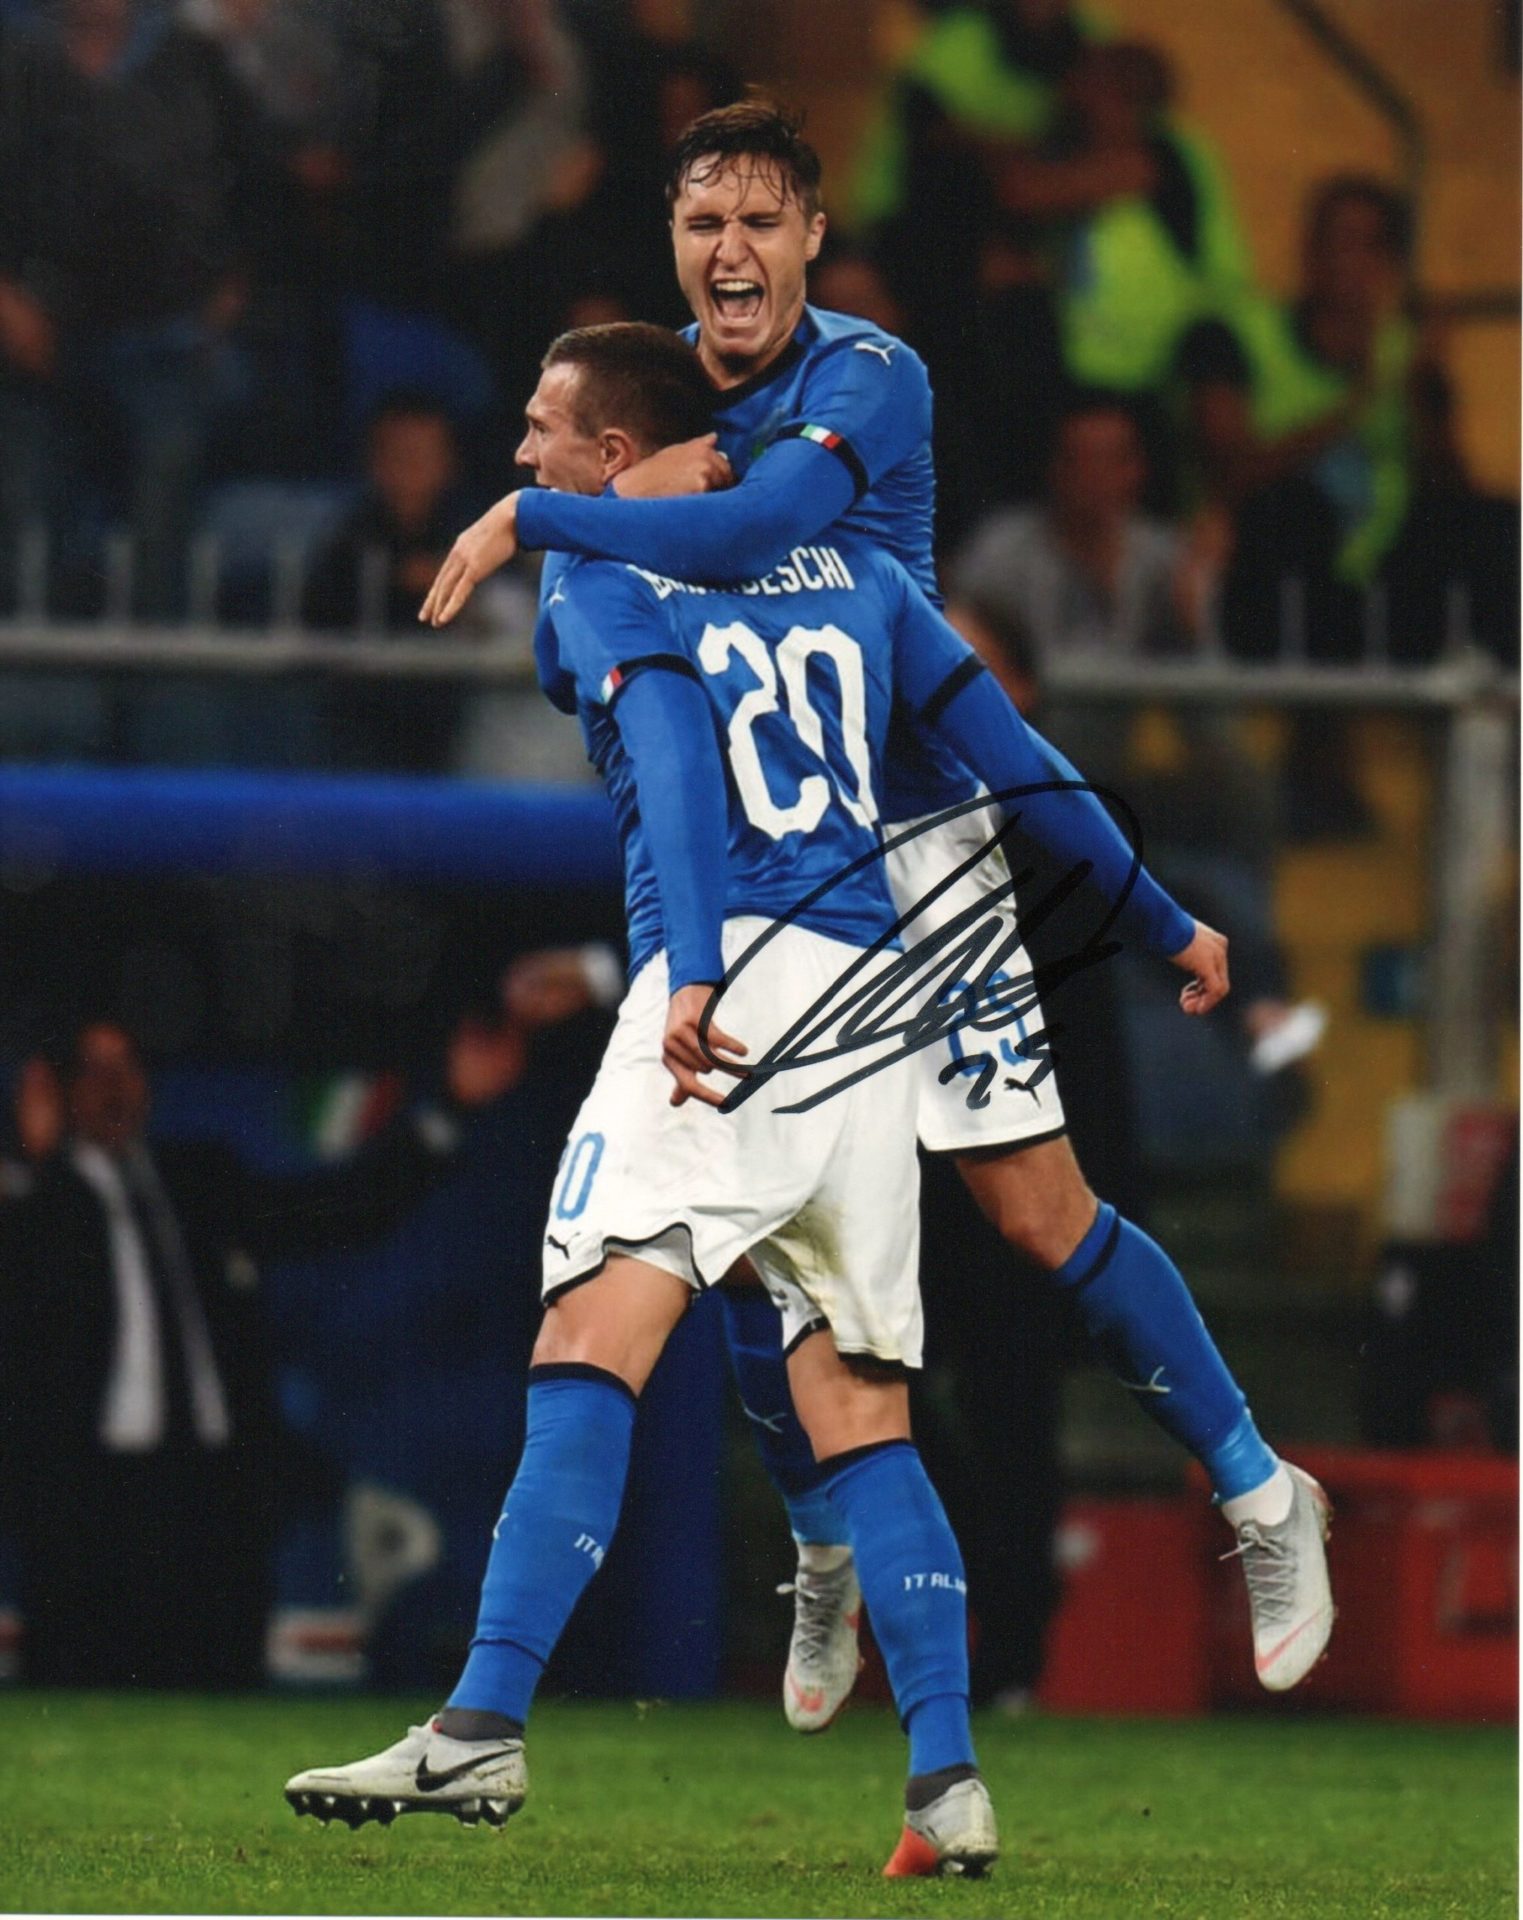 Federico Chiesa - Signed Photo - Soccer (Italy national ...